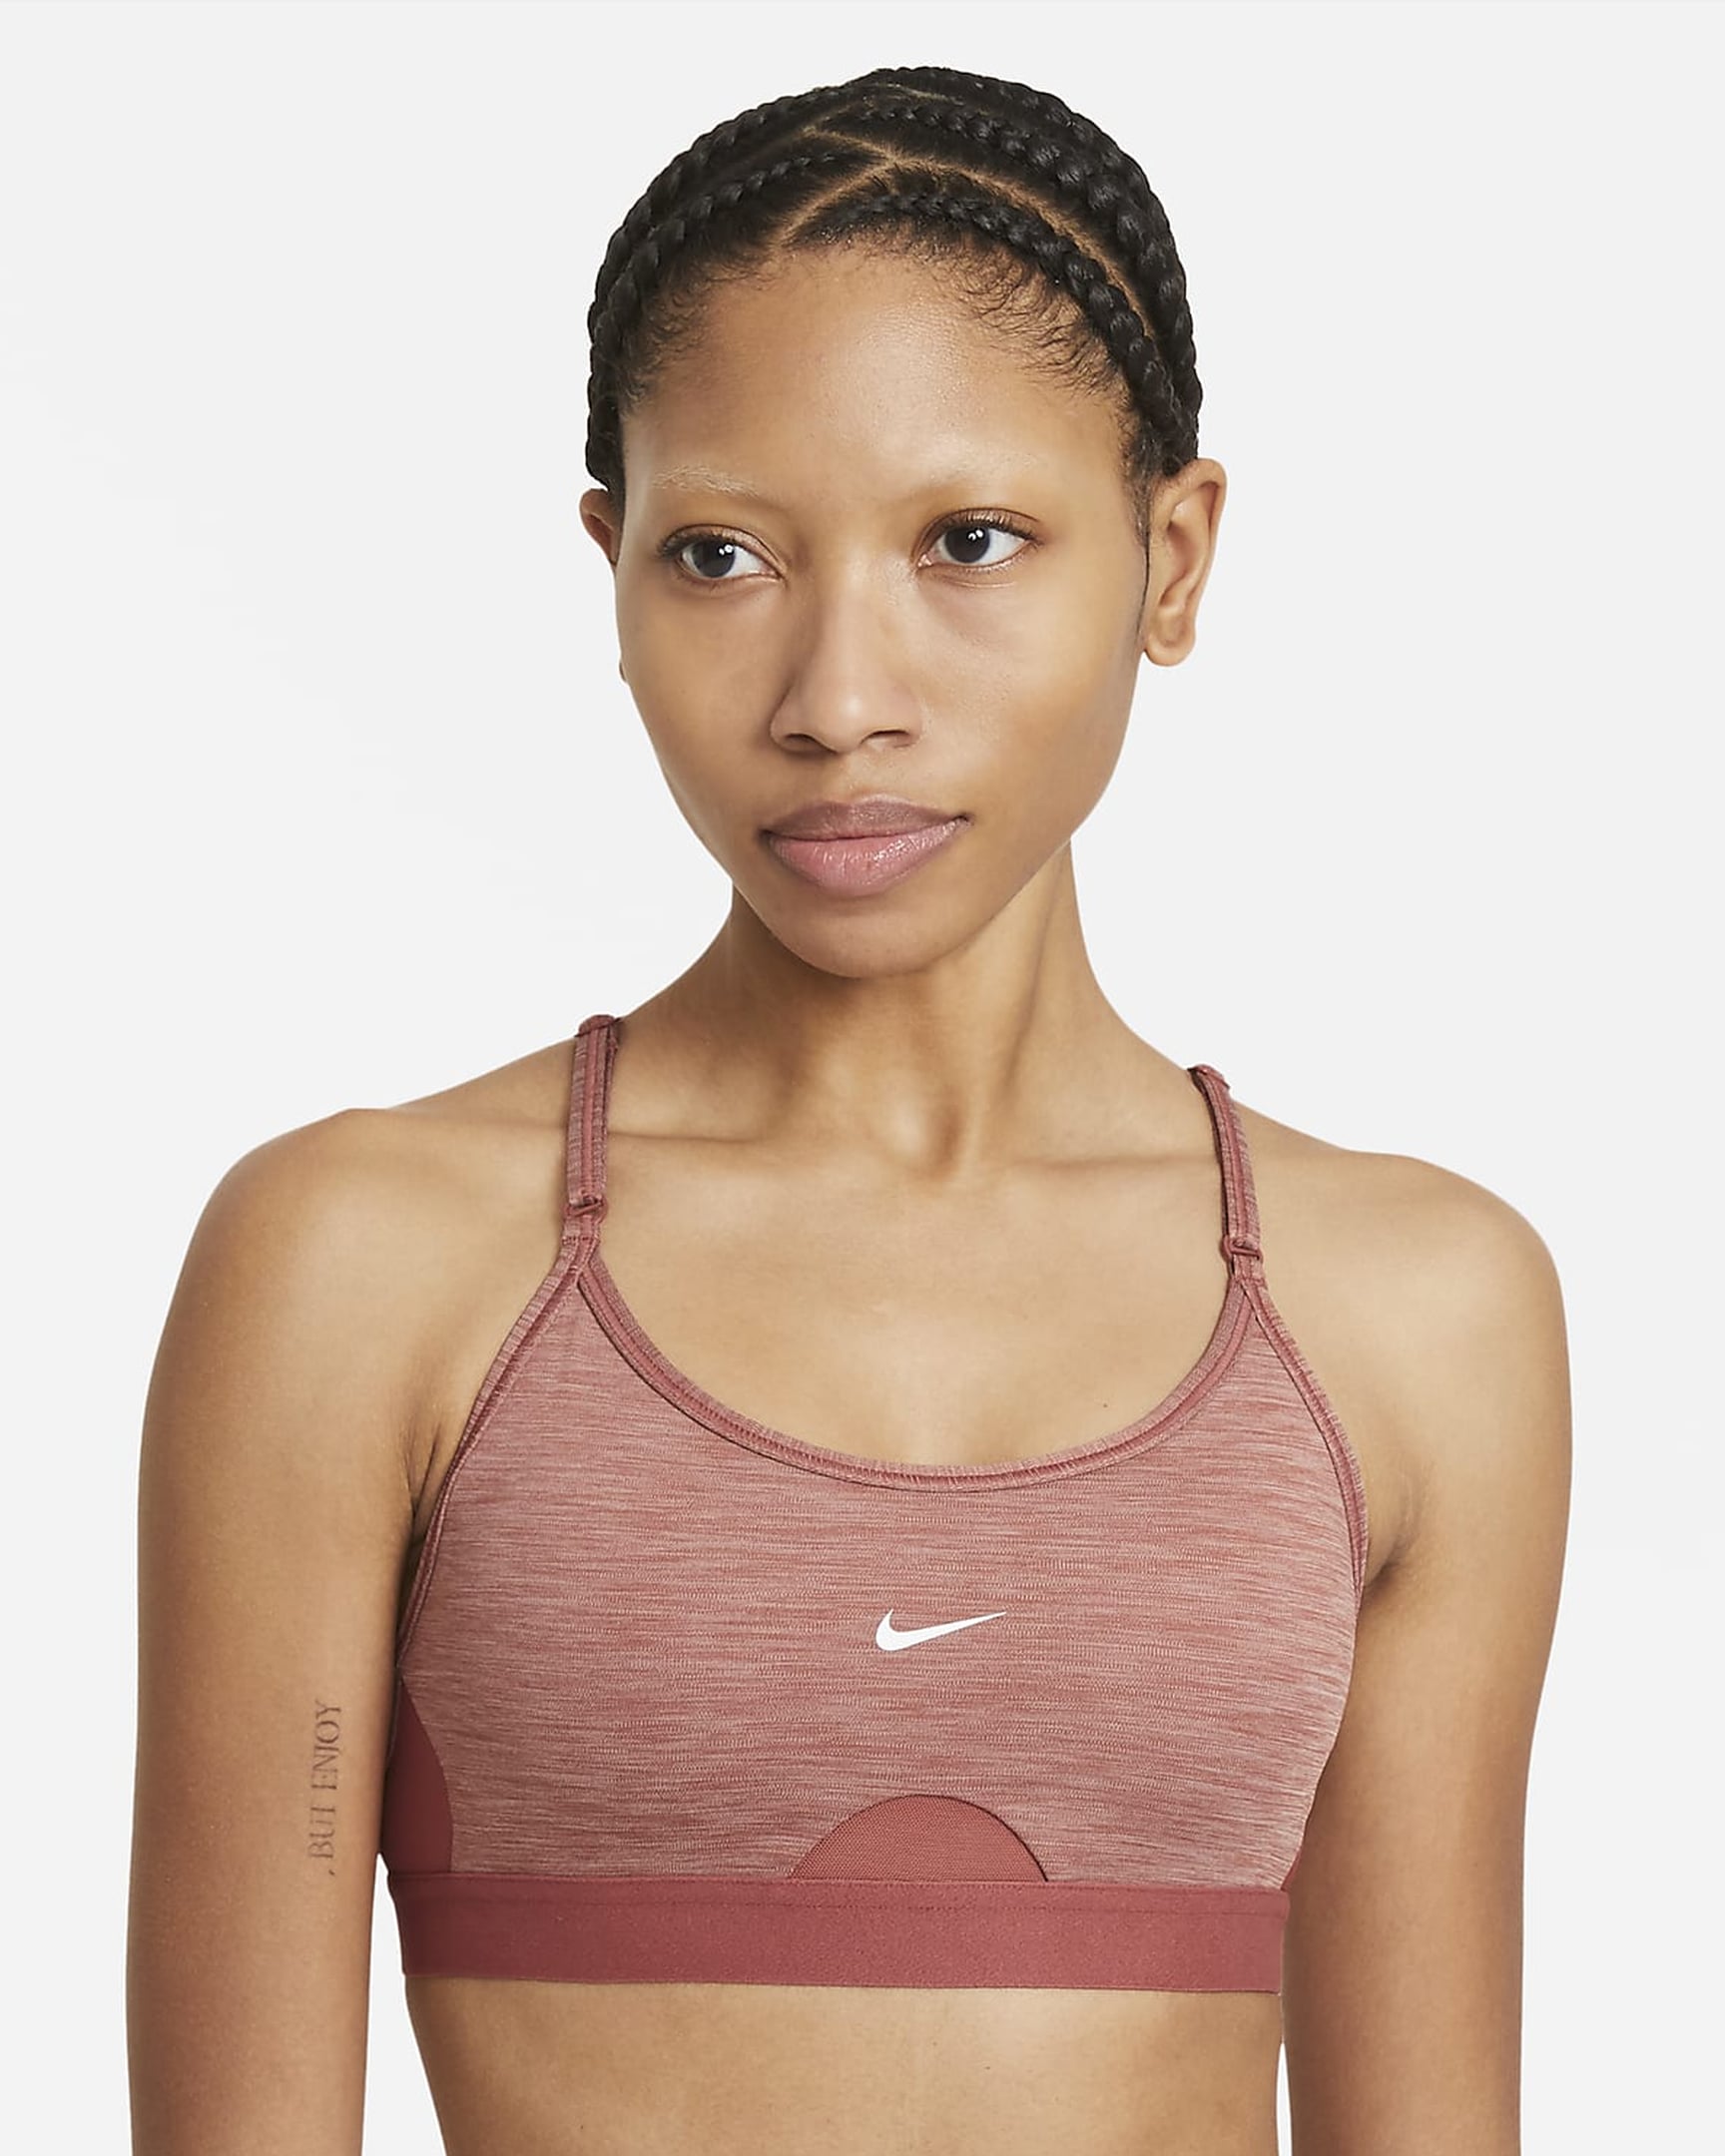 61 Sports Bras Later, We Found the Best Styles for Small Chests